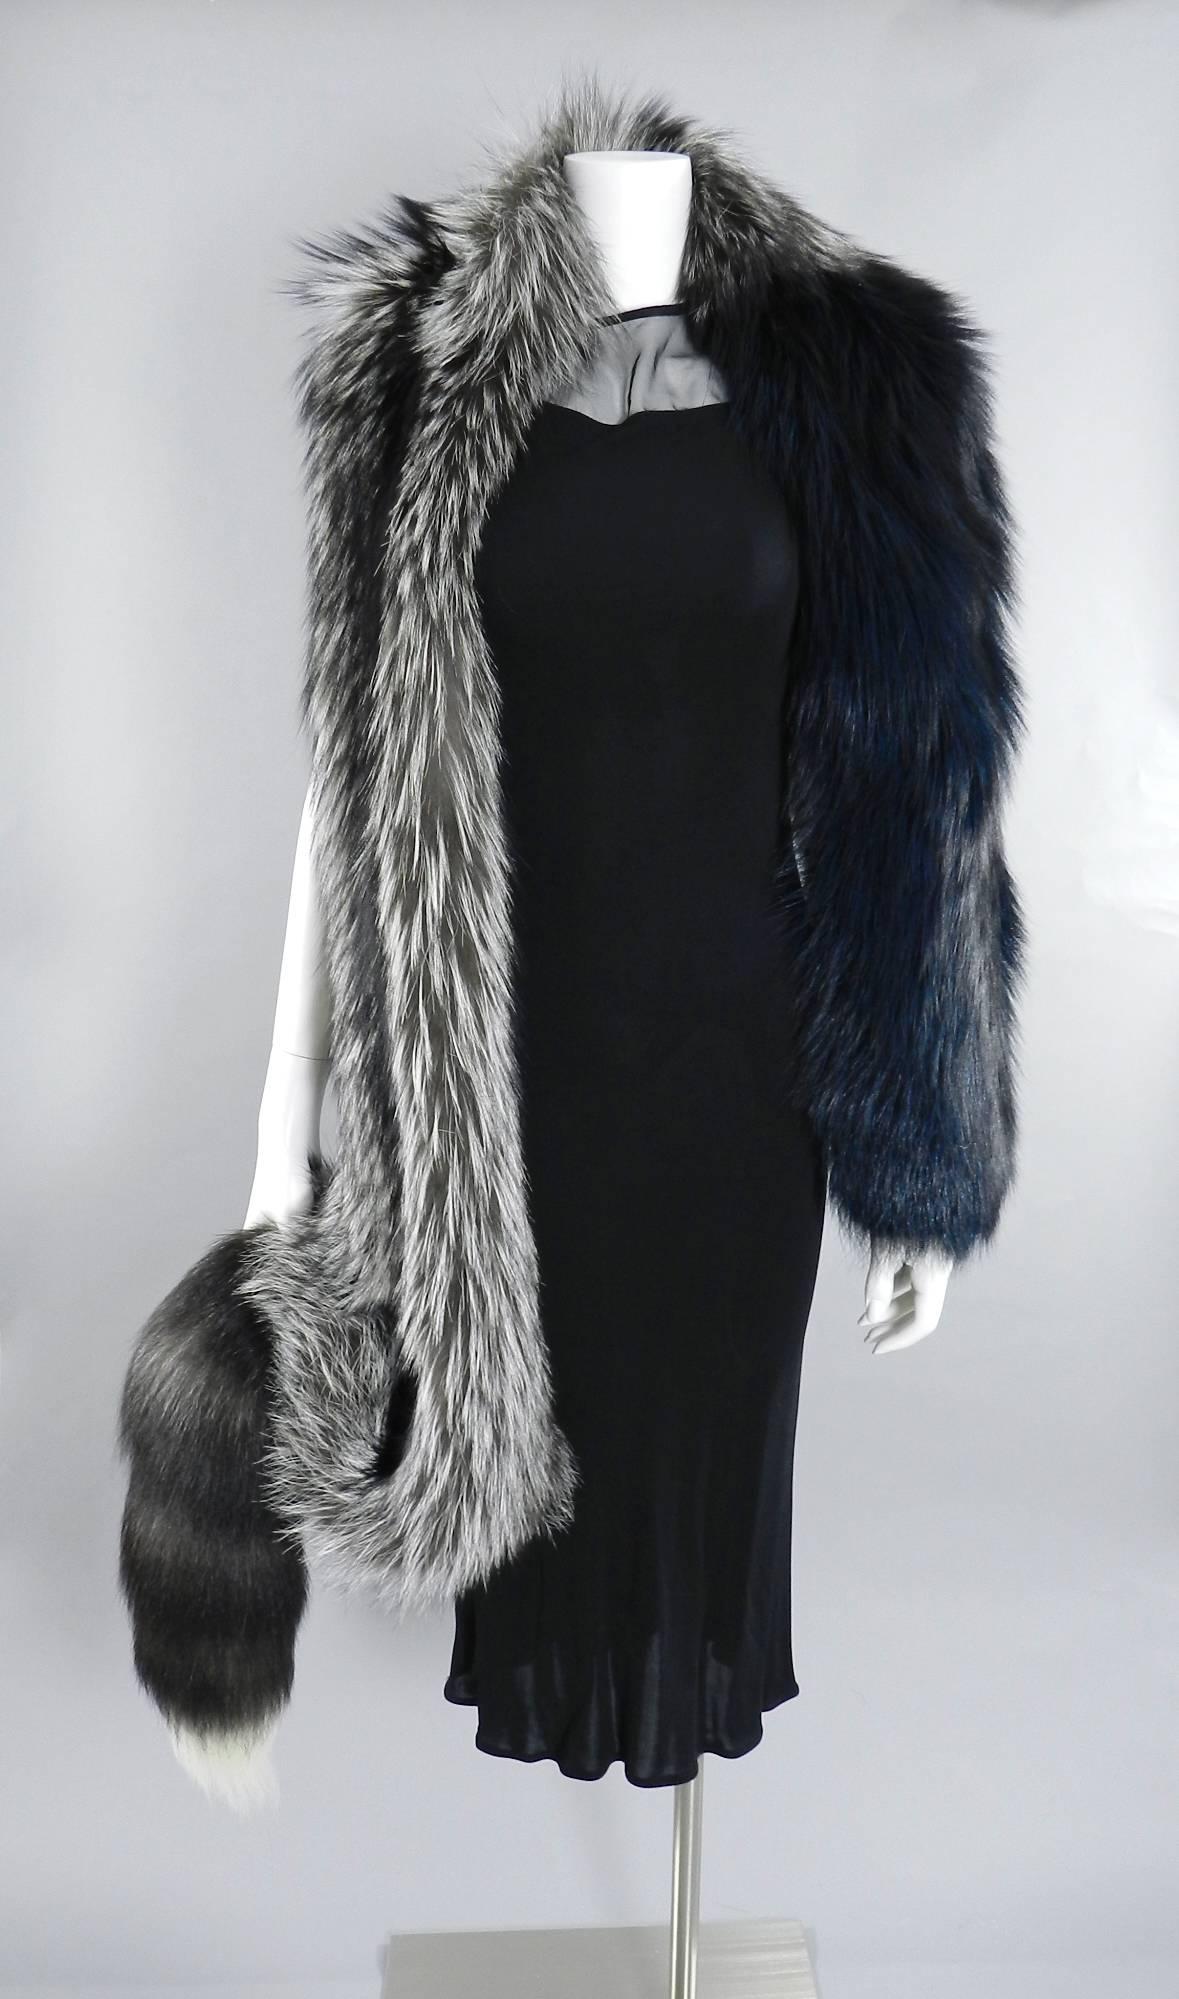 Lanvin fall 2010 Silver fox fur scarf / stole with 1 sleeve. Dramatic Art Deco inspired design. Total length 98